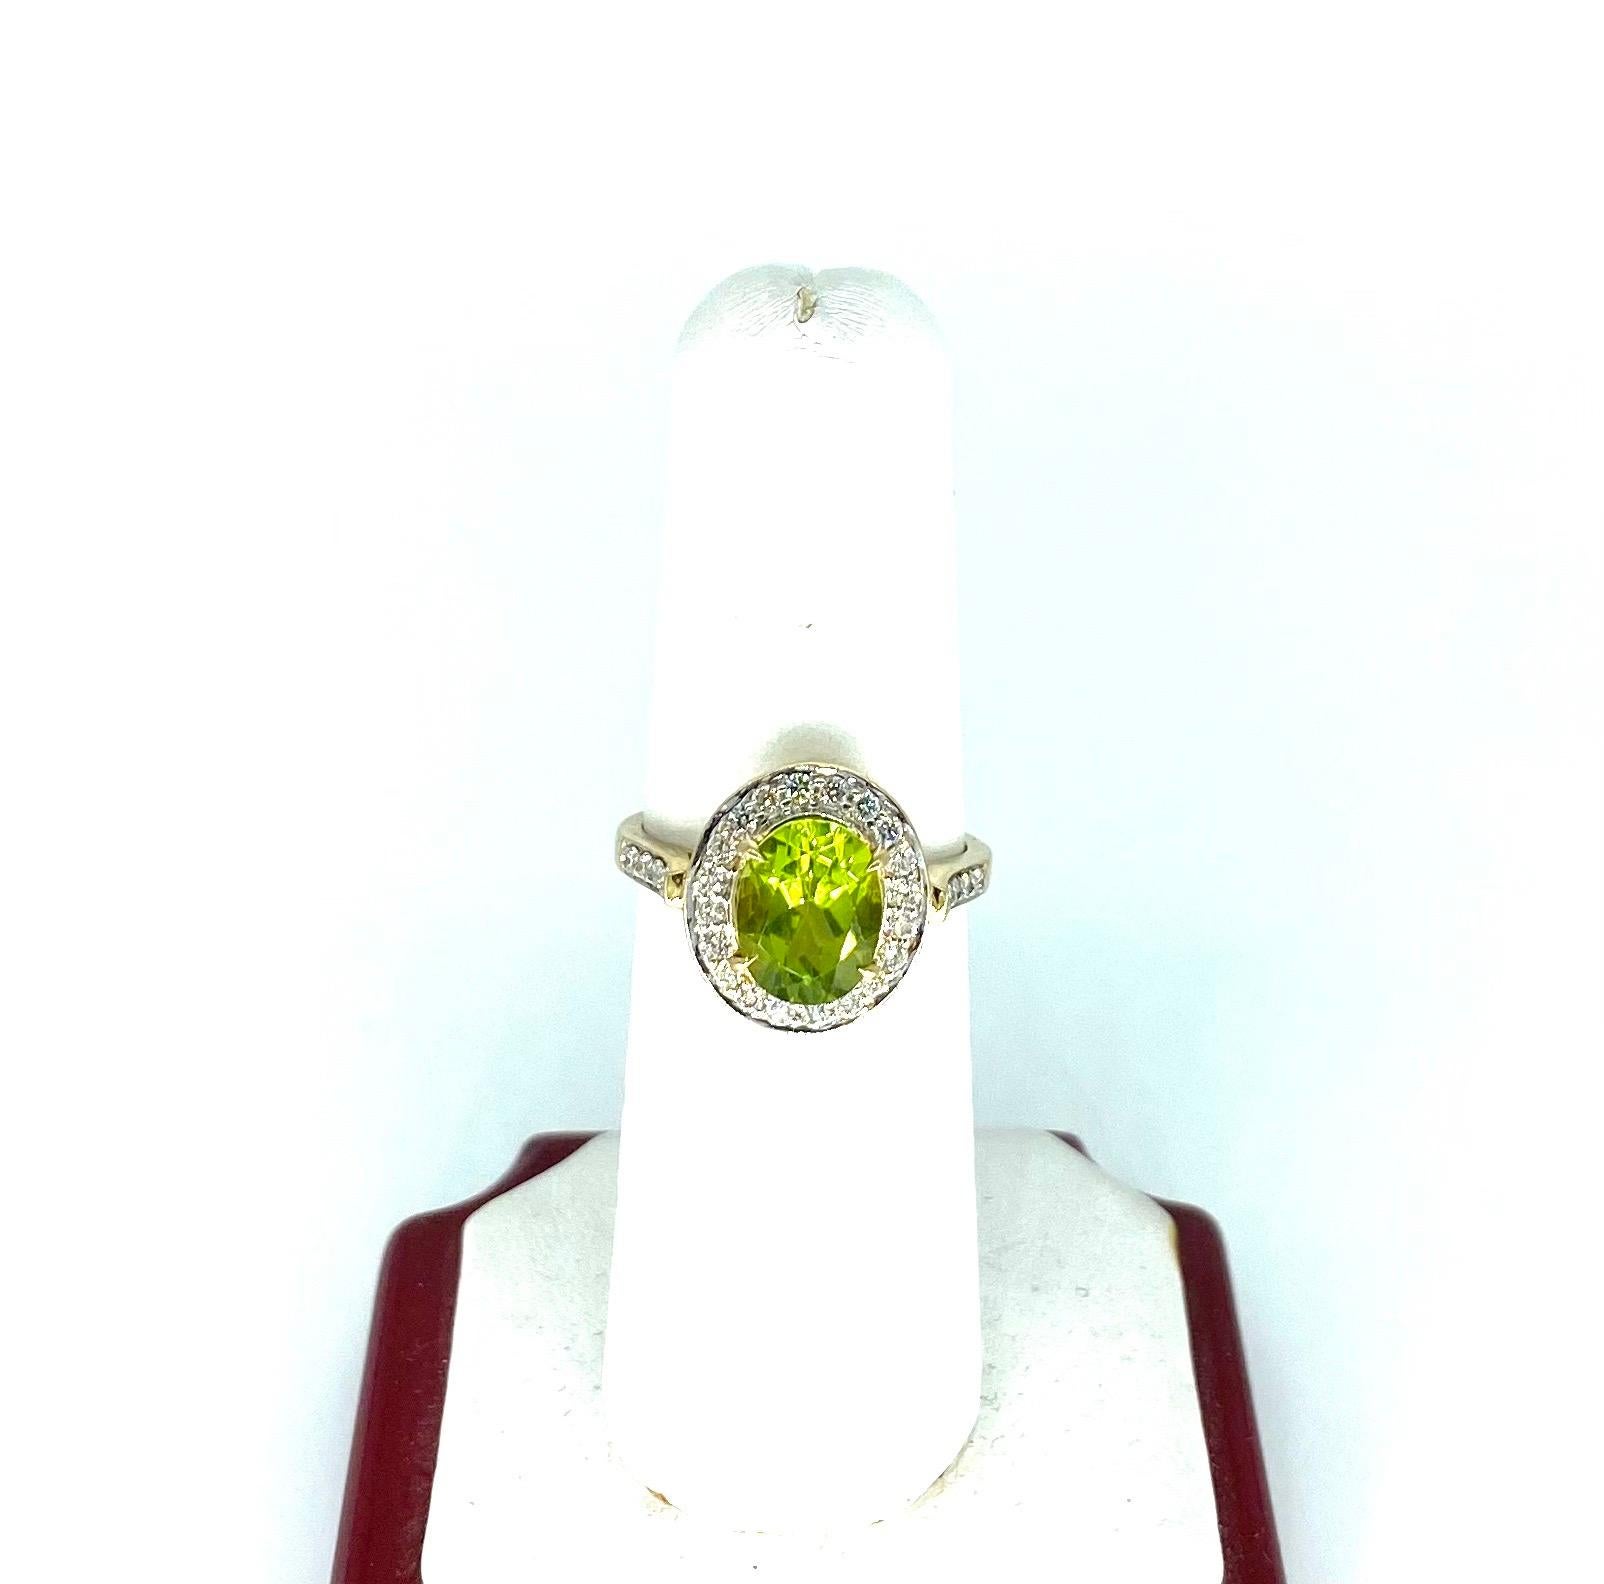 Vintage 4 Carat Peridot & Diamond Cluster Engagement Ring 18k Gold. Gorgeous center Peridot gemstone featuring a surrounding white diamonds throughout. The ring is a size 7 and measures 7mm by 9mm. The ring is made in 18k solid gold and weights 4.6